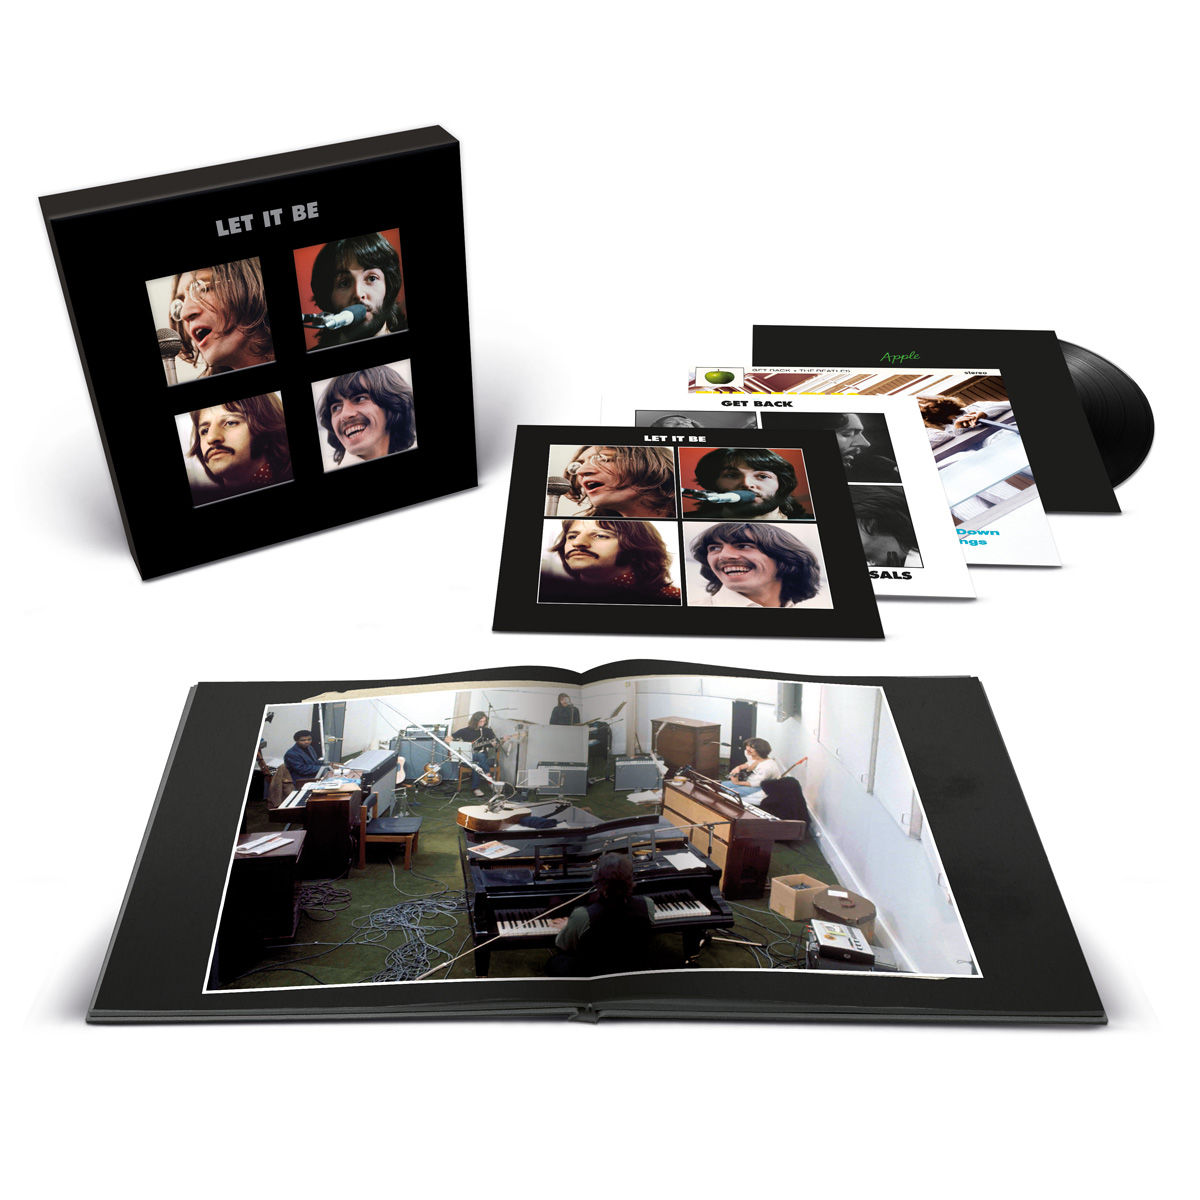 The Beatles - Let It Be – Special Edition (Super Deluxe Vinyl) 